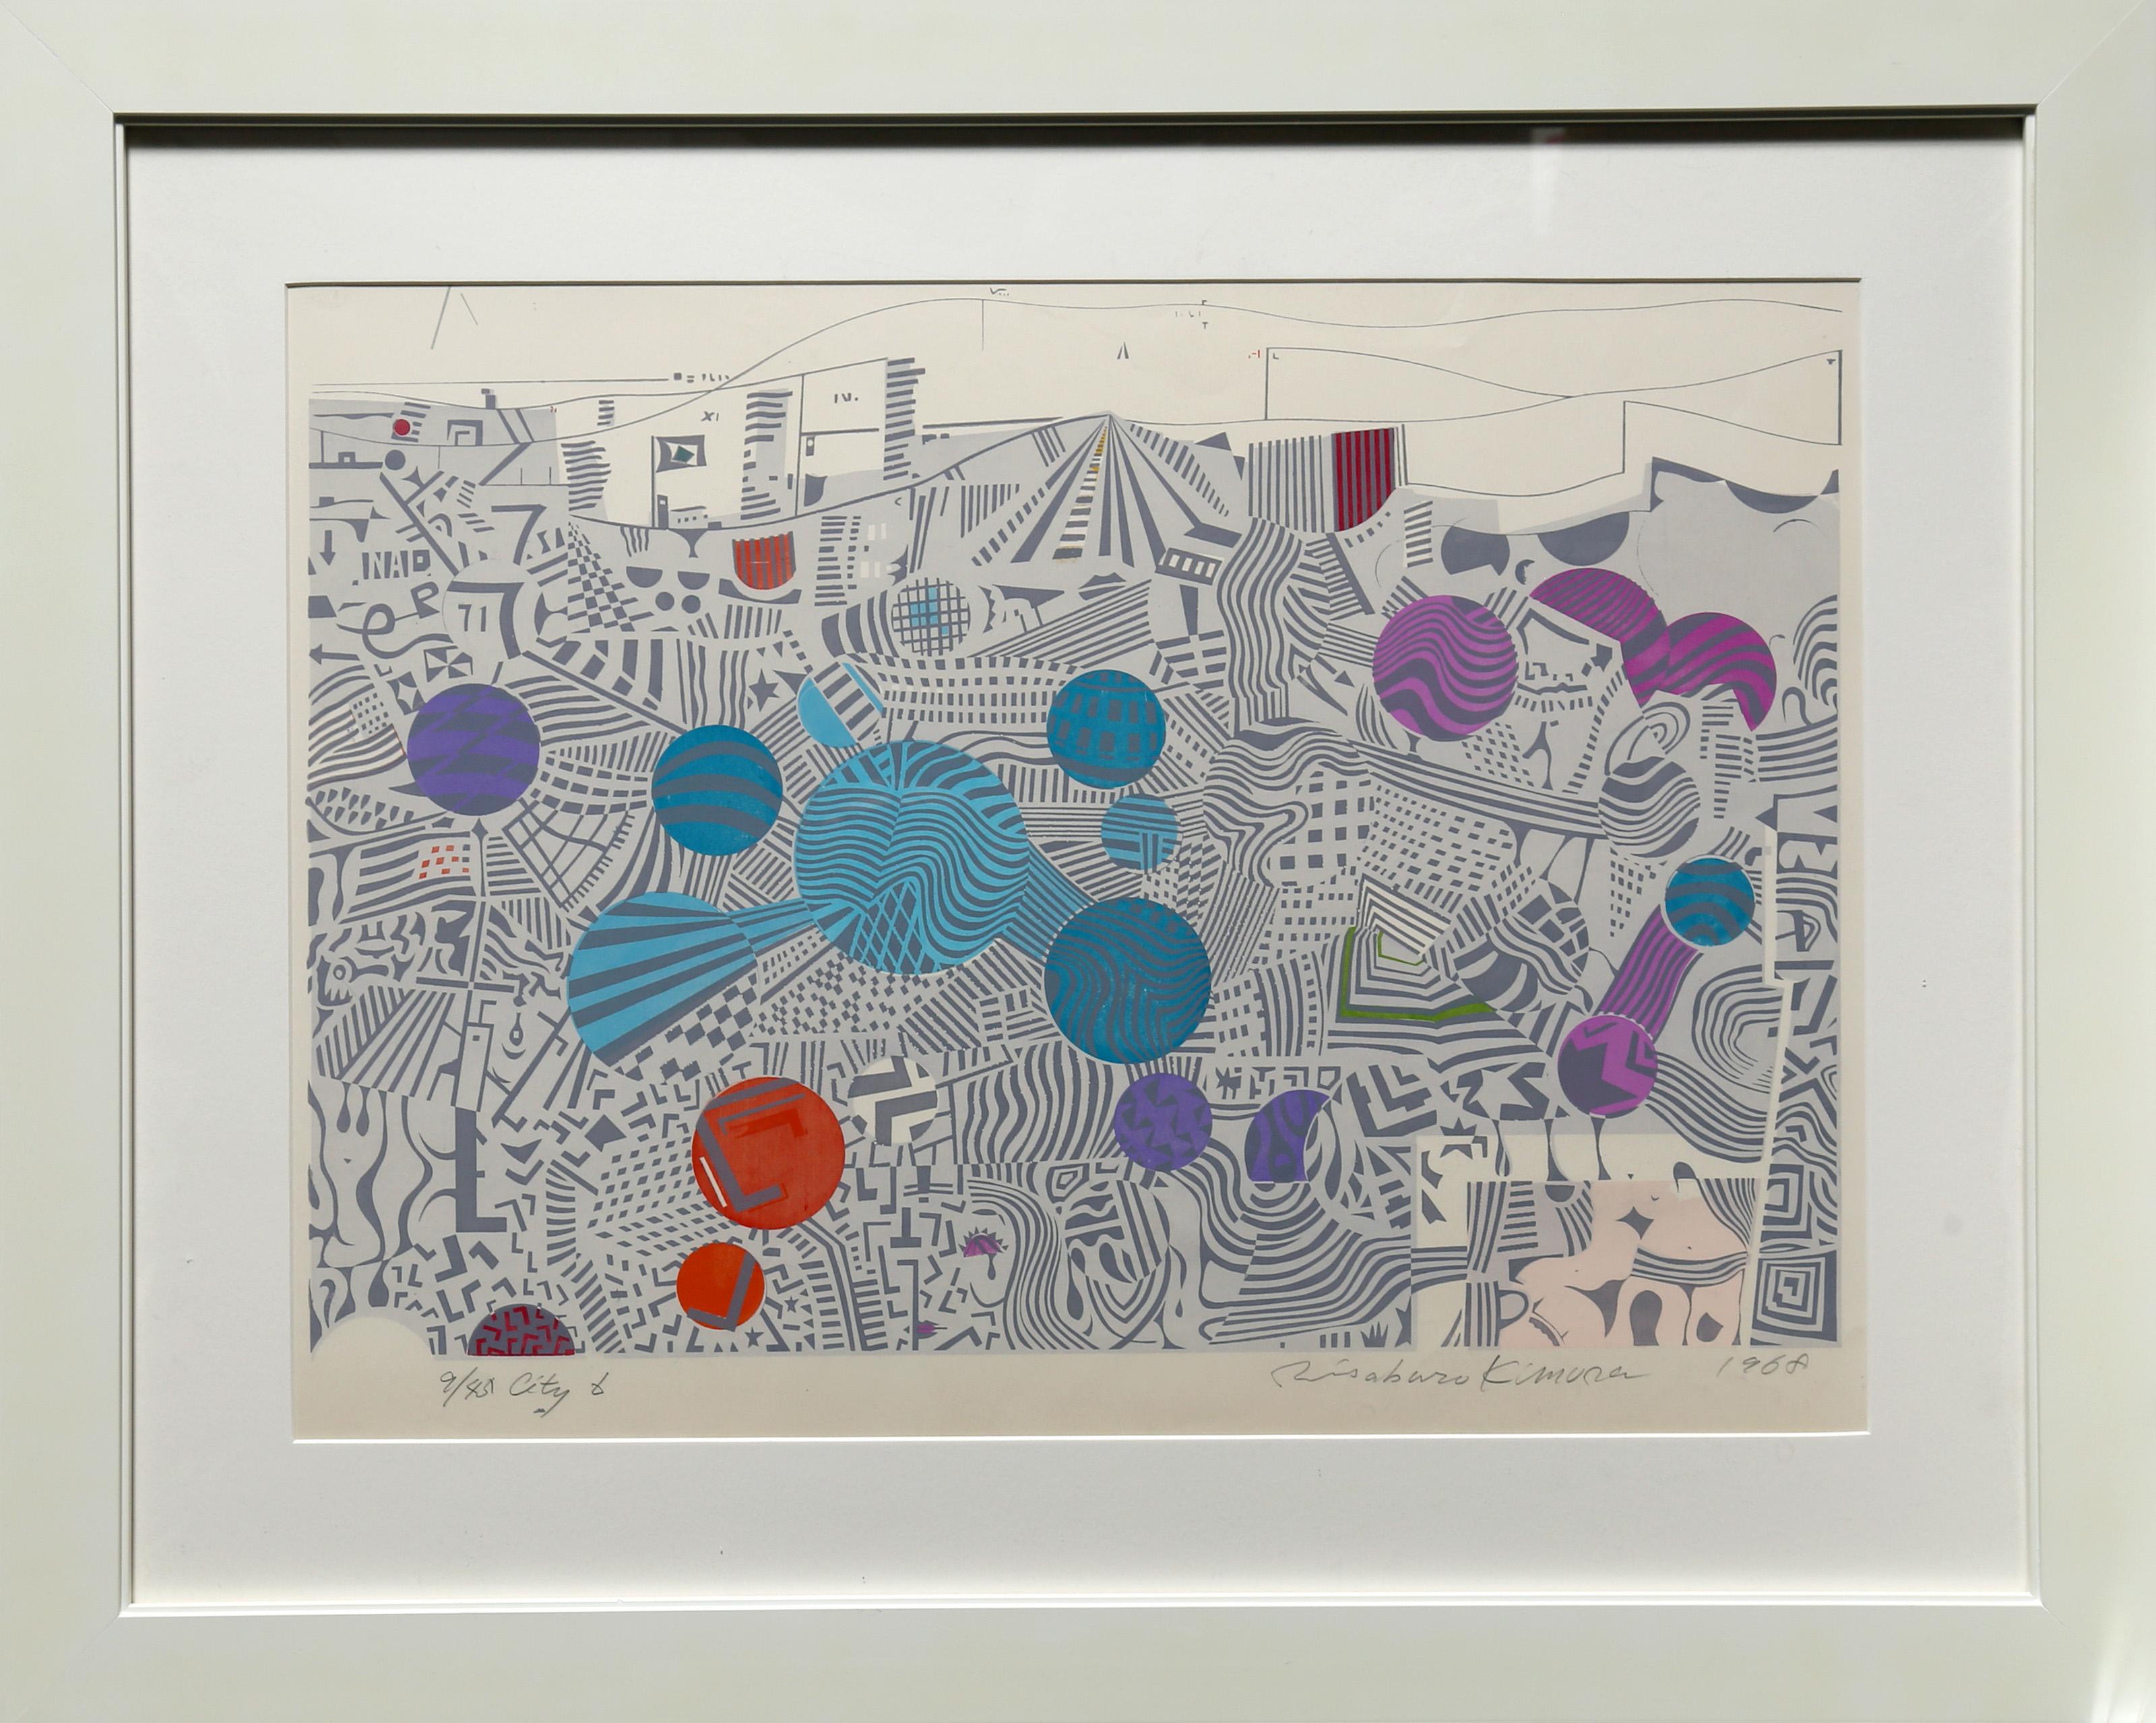 "City 6" is an original 1968 hand-signed and numbered (9/45) screenprint by Risaburo Kimura, Japanese (1924 - 2014), nicely framed. The artist has special affinity for big cities, being born close to Tokyo and later living in New York. In the late